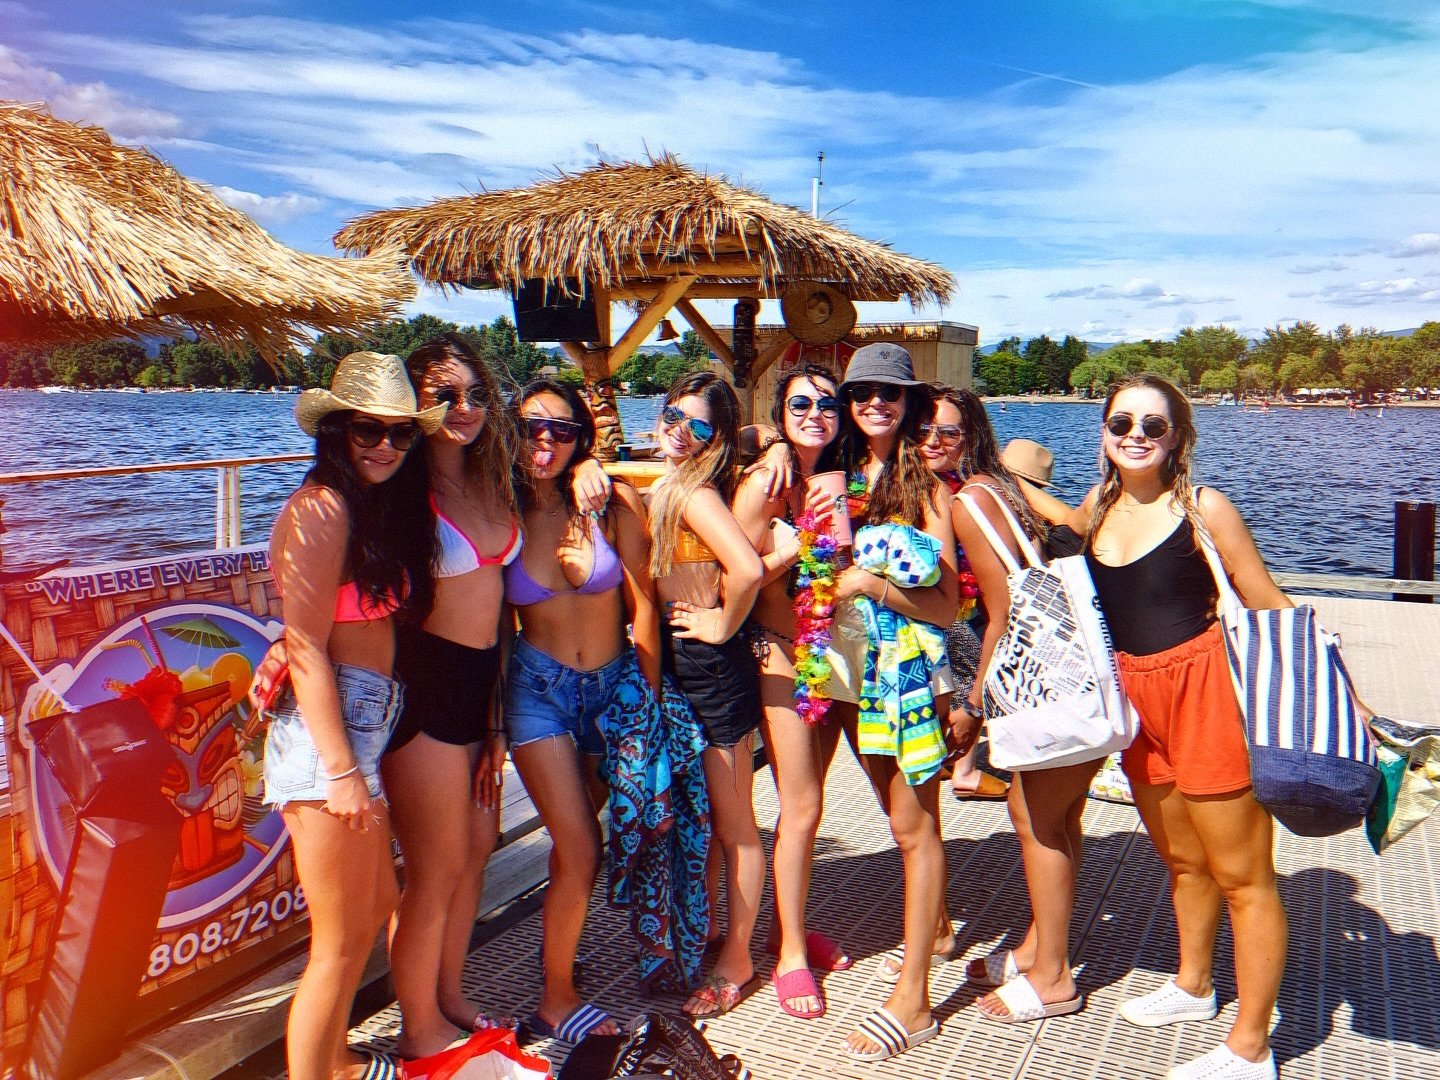 It&rsquo;s time to make your long weekend plans!! ⏰ 
The Summer fills up extremely fast, so book your Tiki Boat Tours early to guarantee those sunny summer afternoons spent on the lake. ☀️ 

#tikitimetours #kelowna #kelownabc #kelownasummer #okanagan